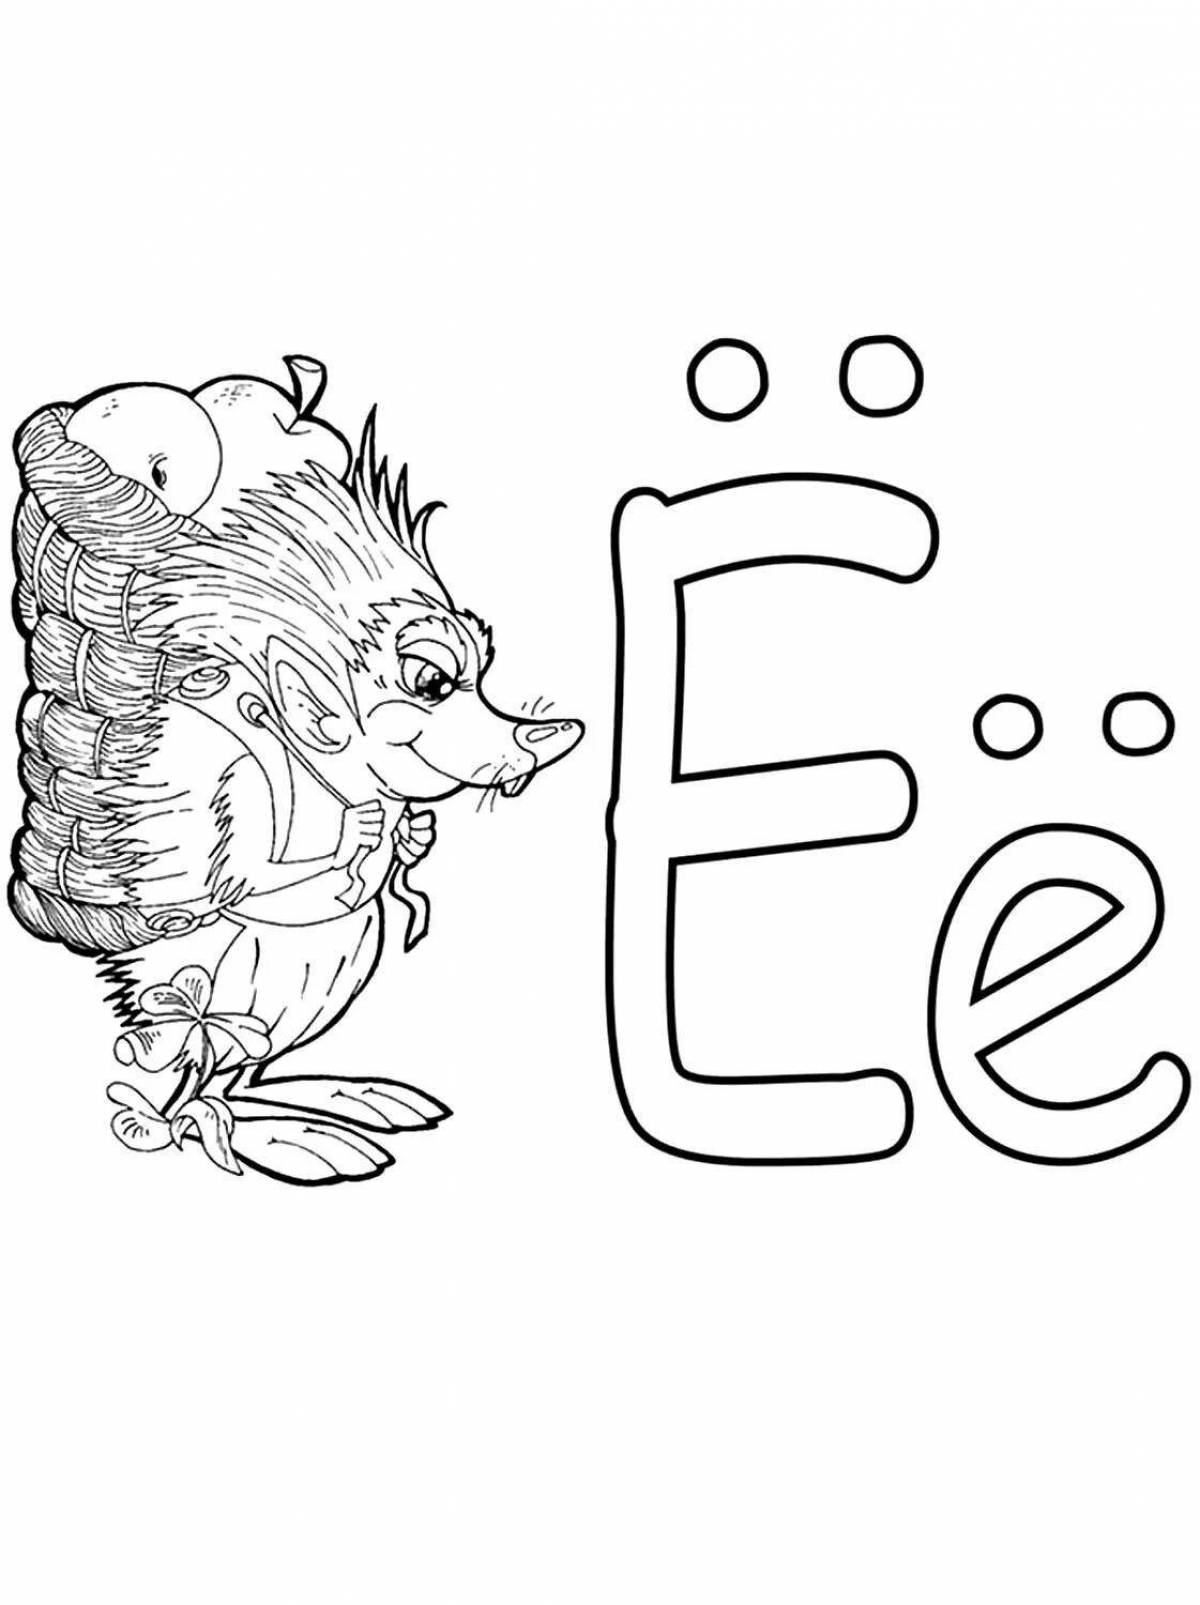 Colorful letter e coloring book for little kids